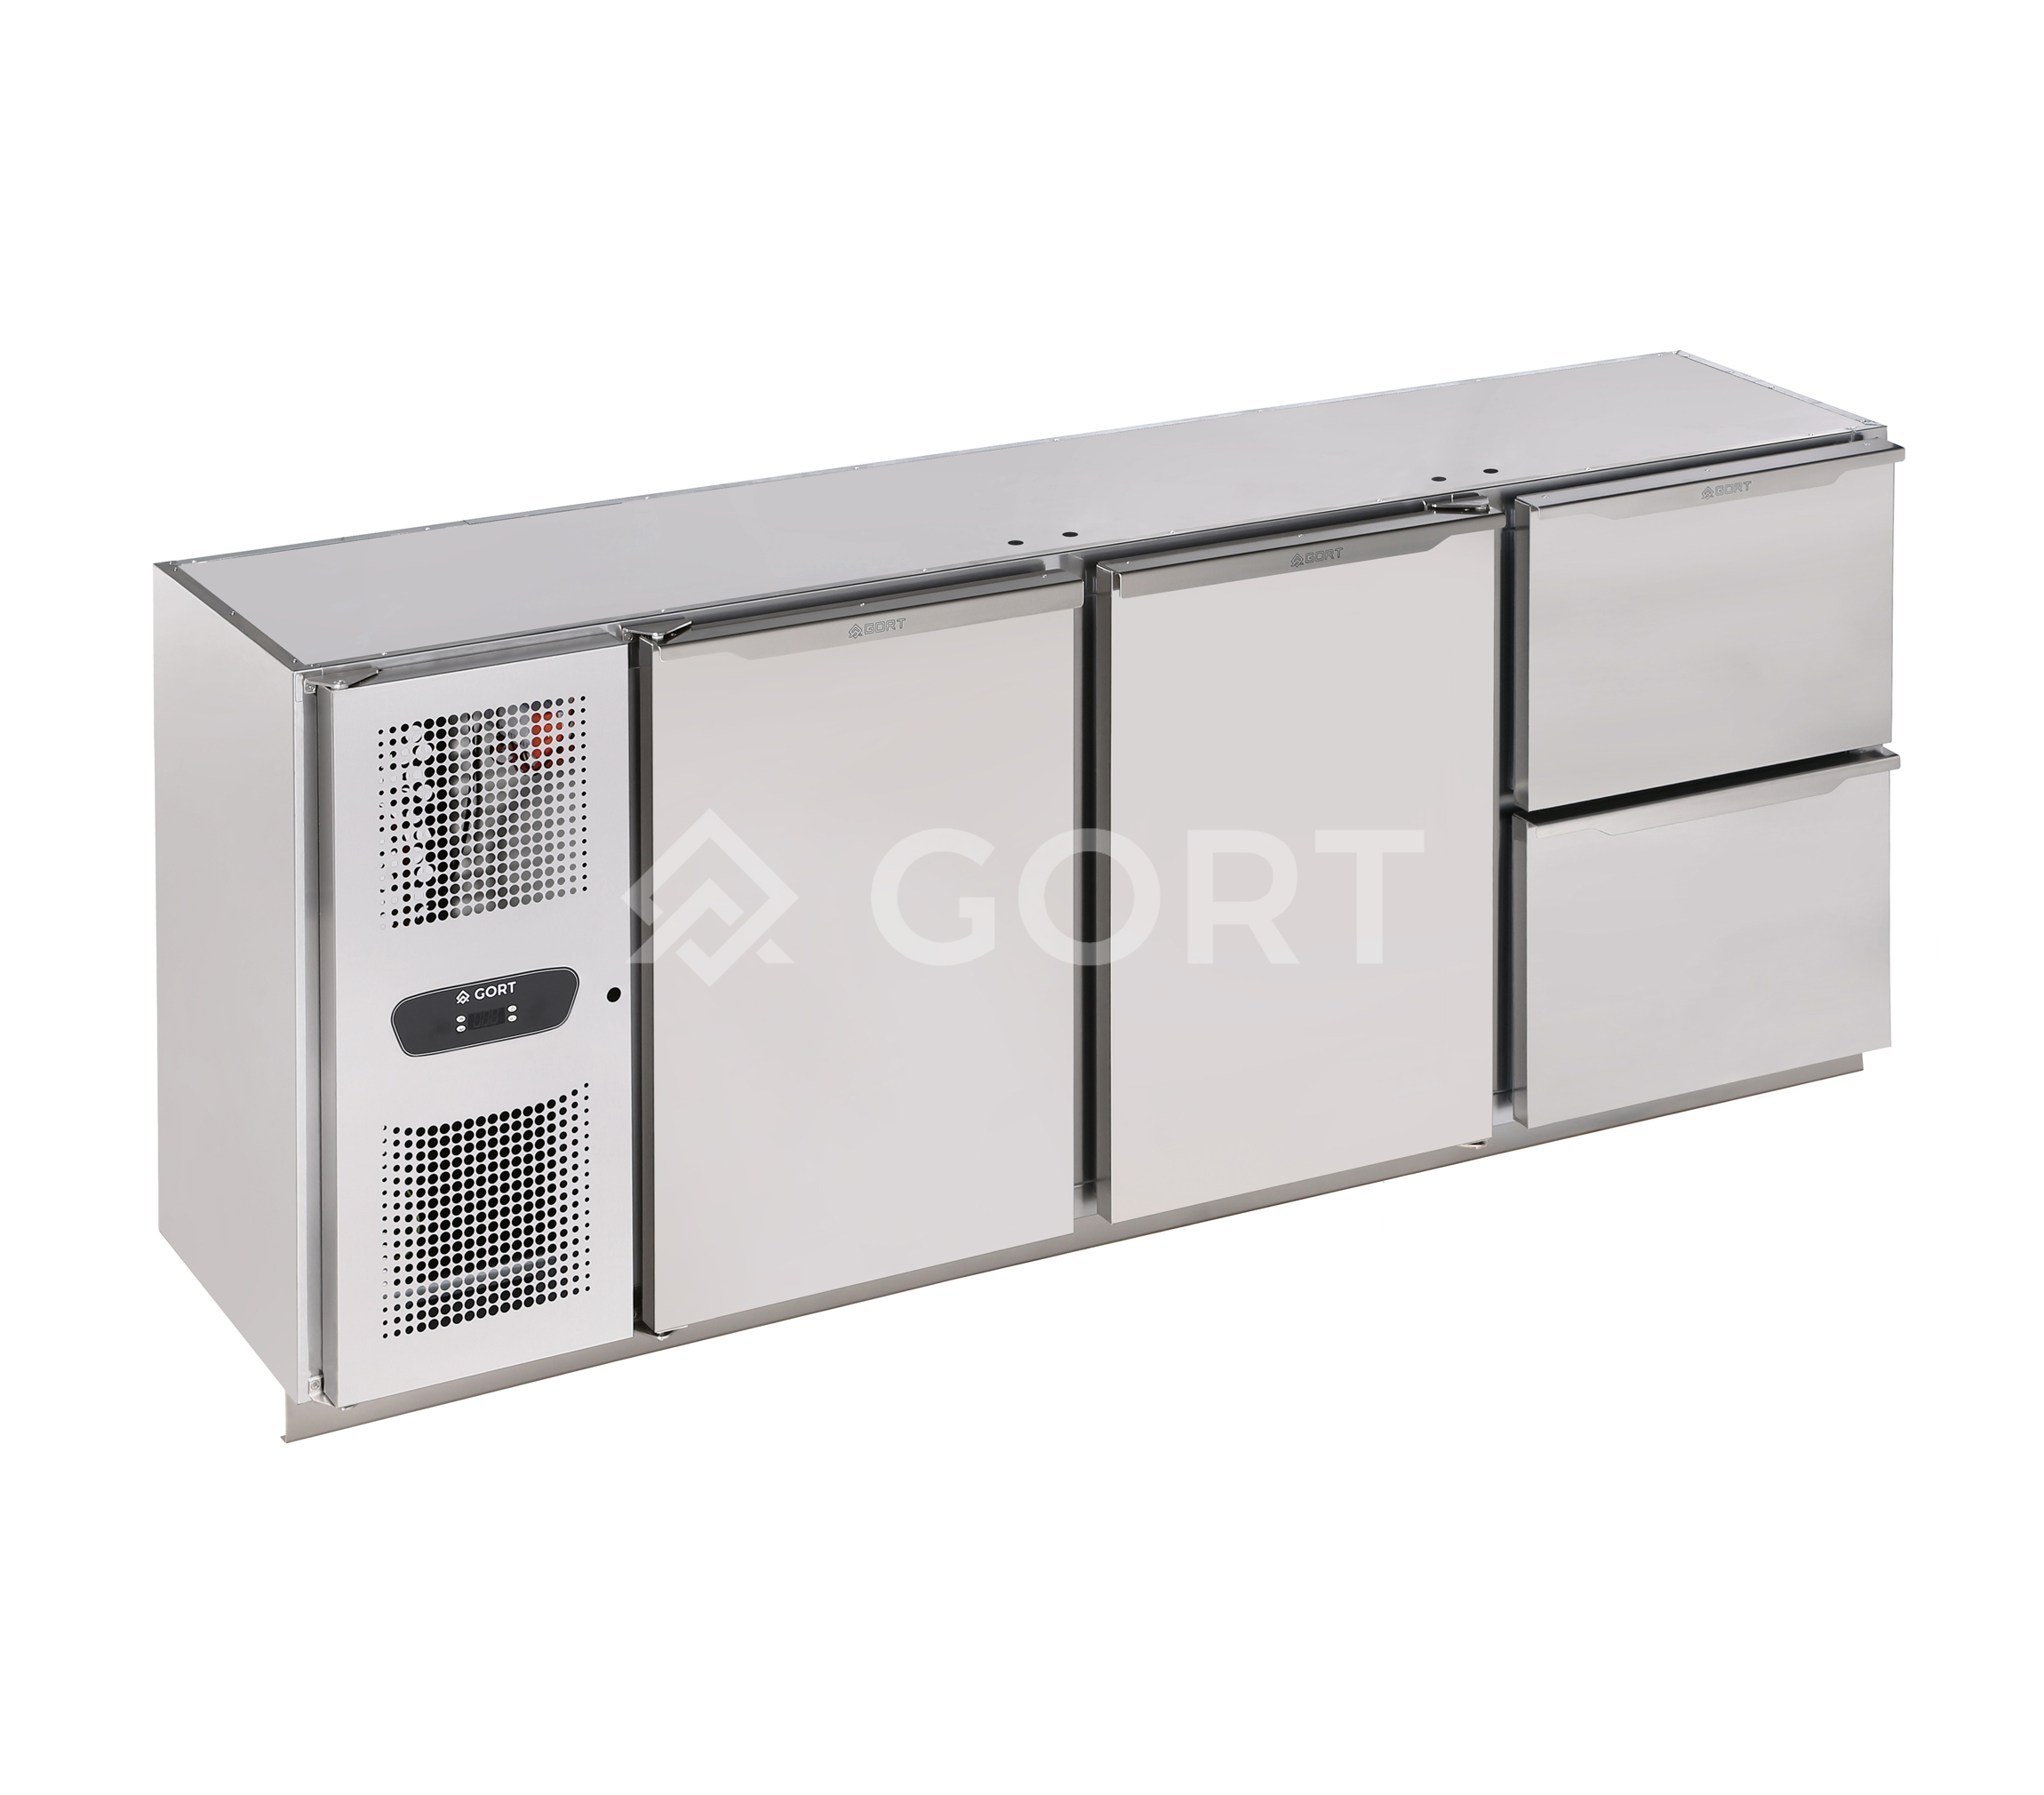 BAR COUNTER REFRIGERATOR with 2 s/s doors & 2 s/s drawers – compressor on the side